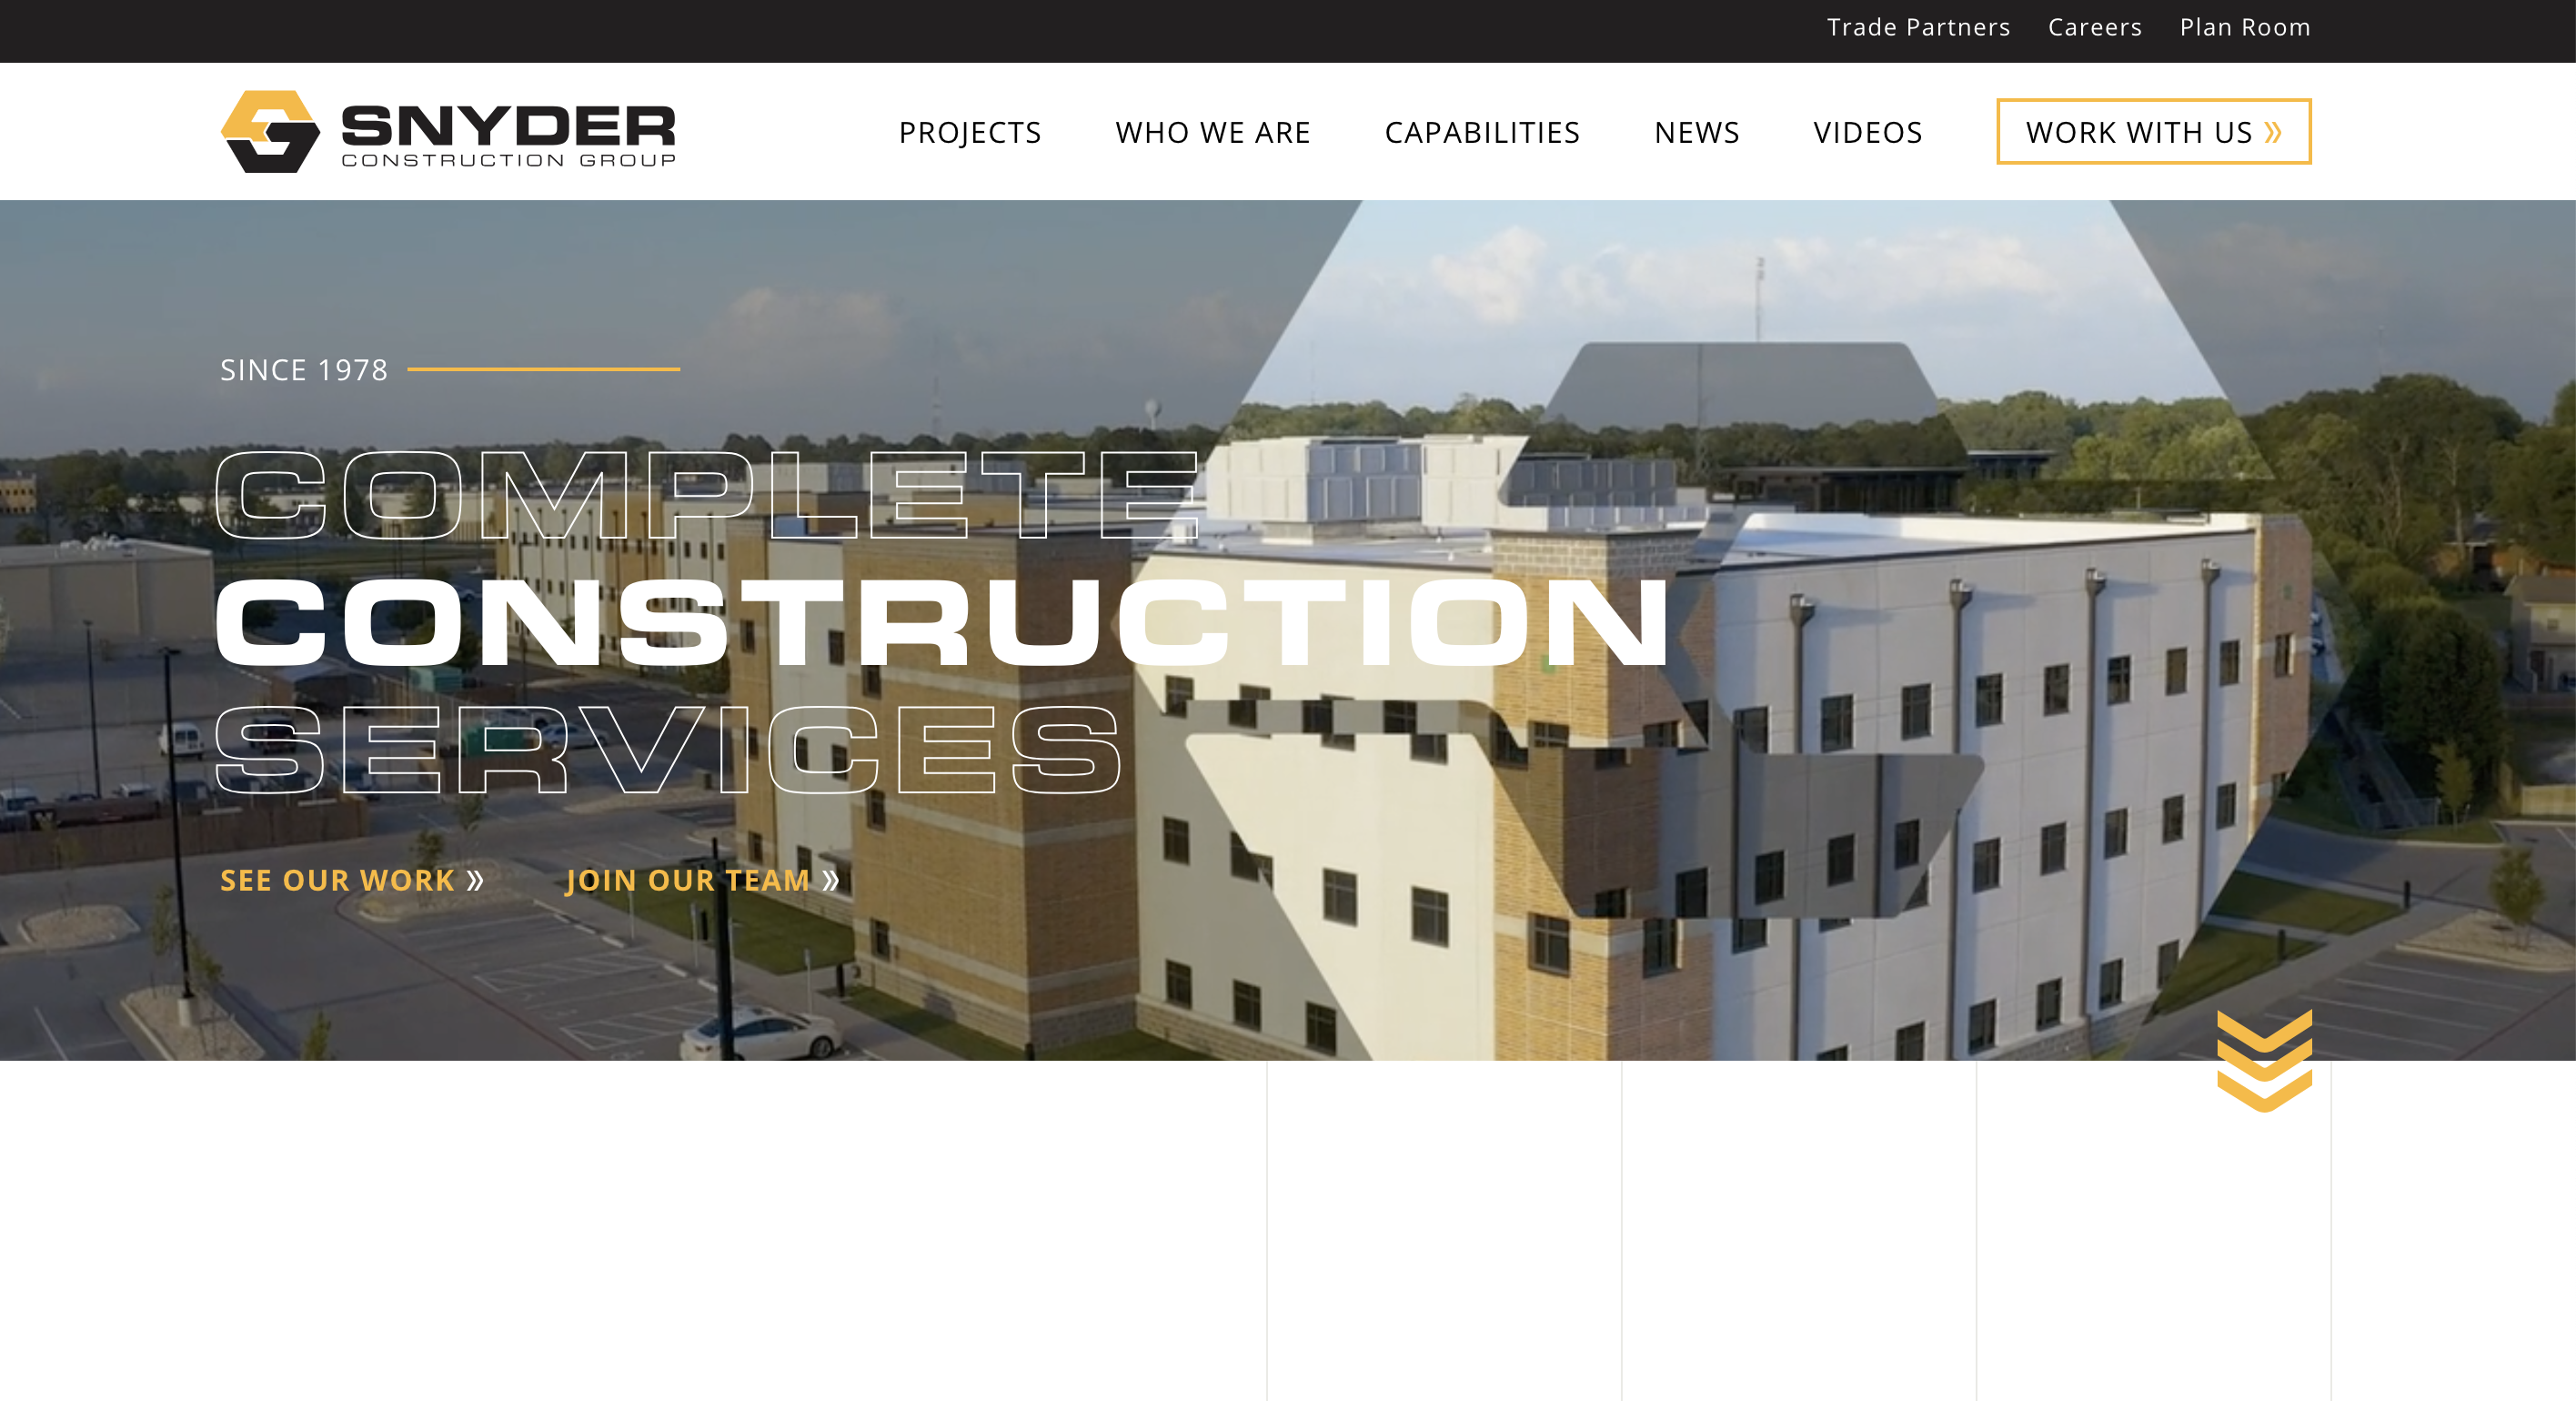 snyder-construction-group-homepage